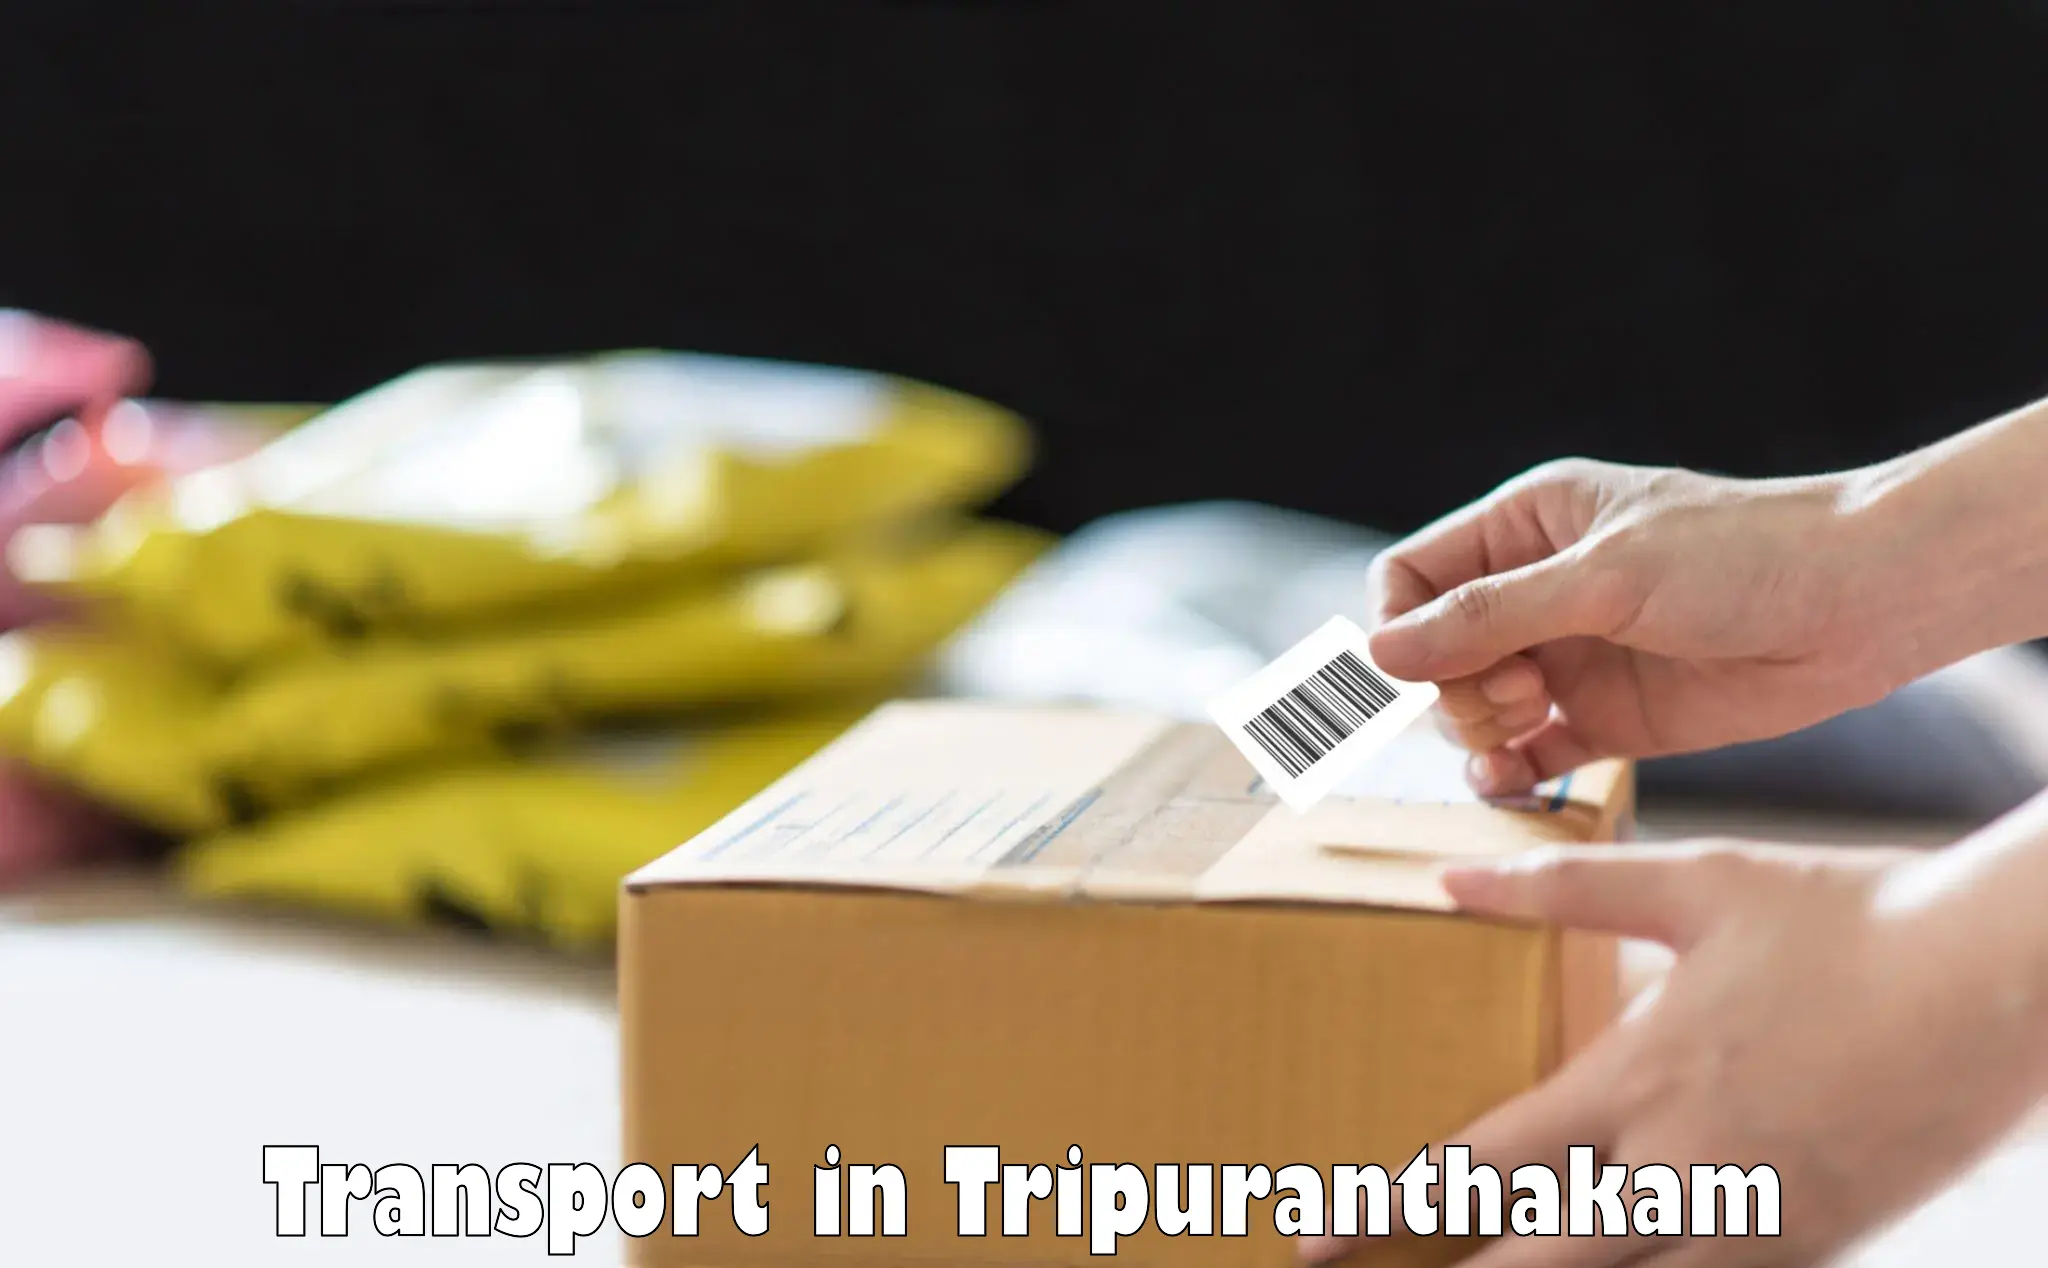 Transport bike from one state to another in Tripuranthakam